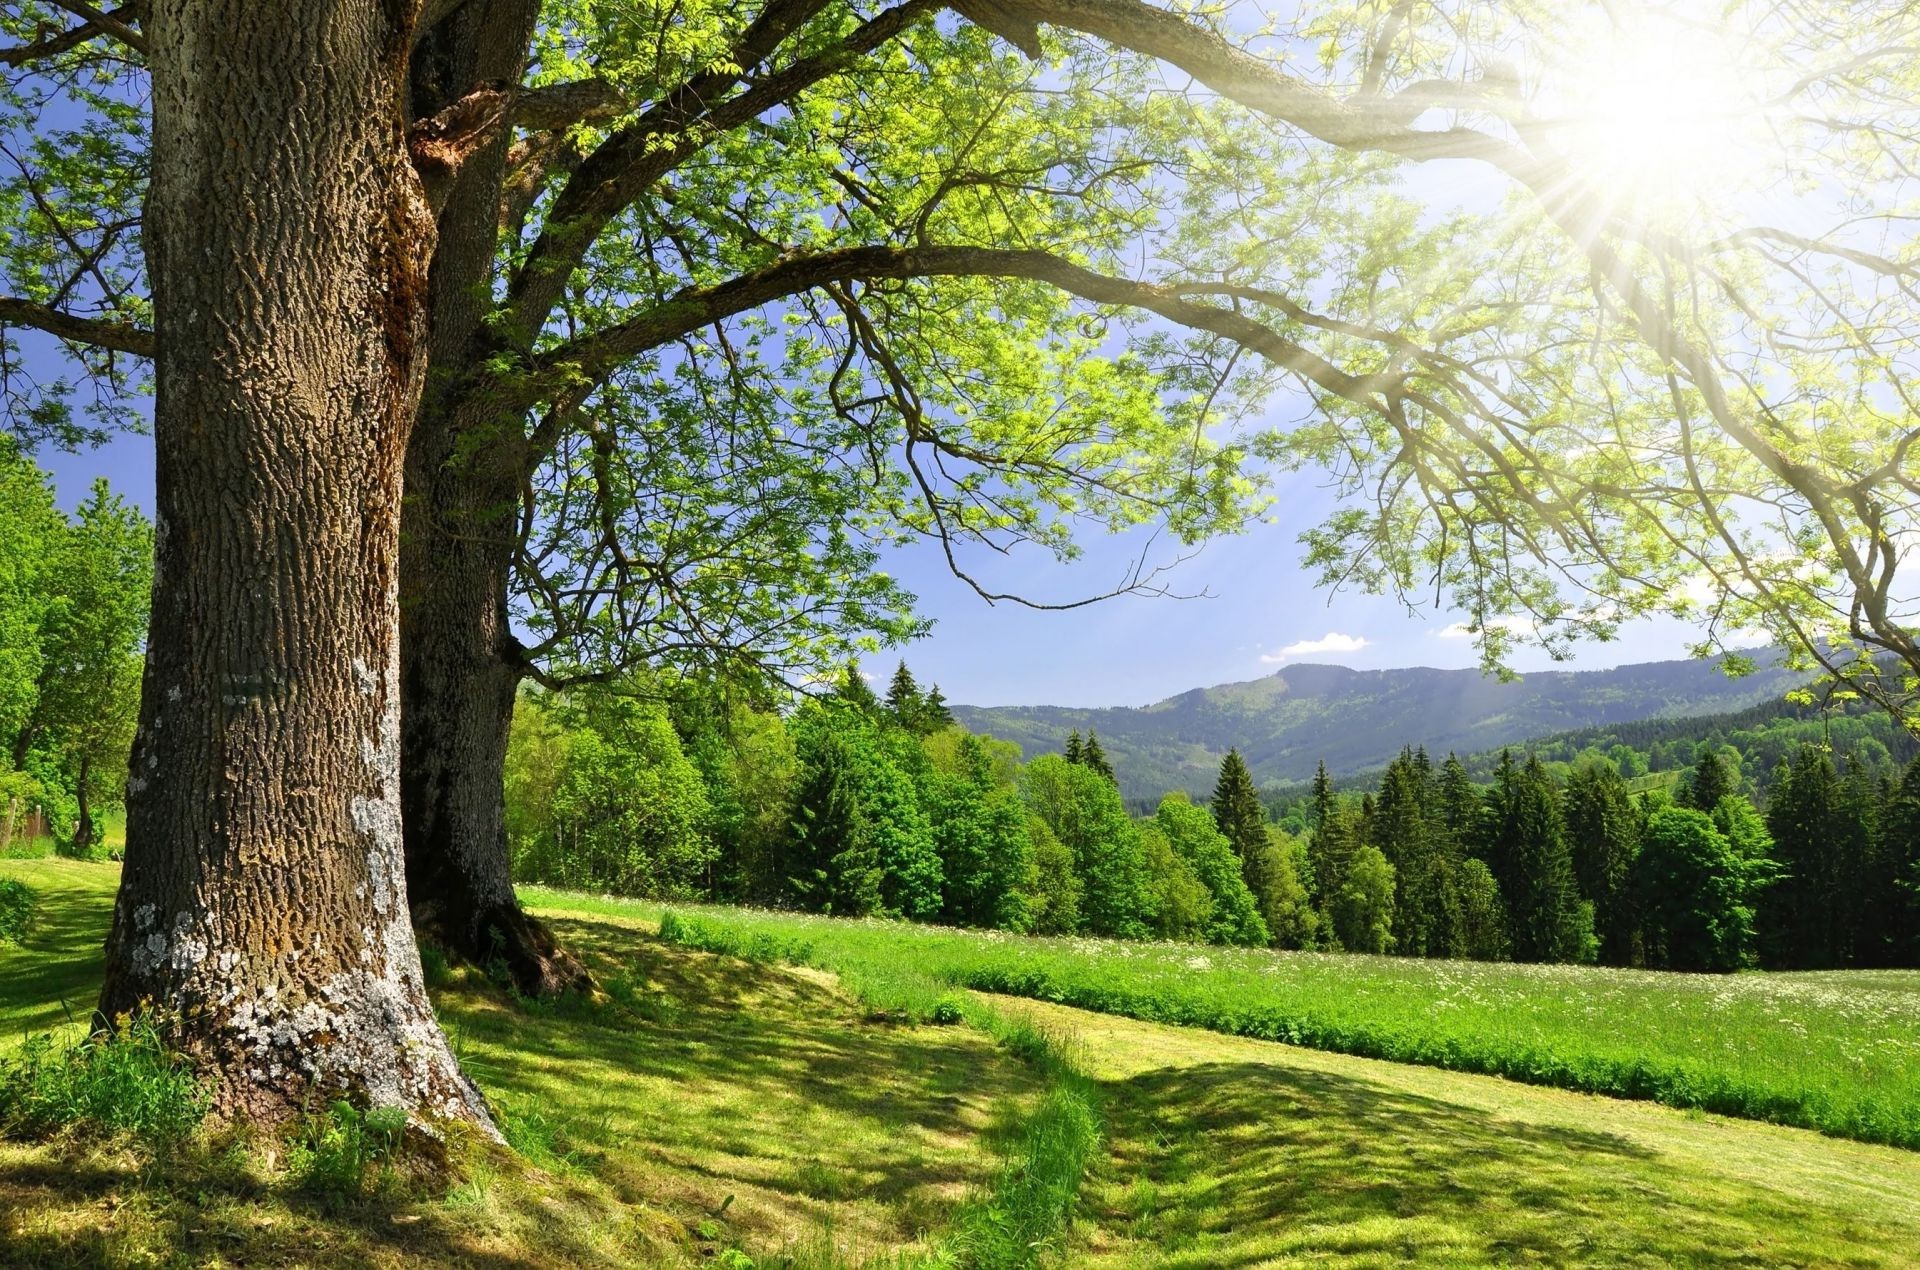 the sunlight and rays tree landscape nature wood leaf park season fair weather outdoors grass scenic summer environment rural scenery fall scene bright sun